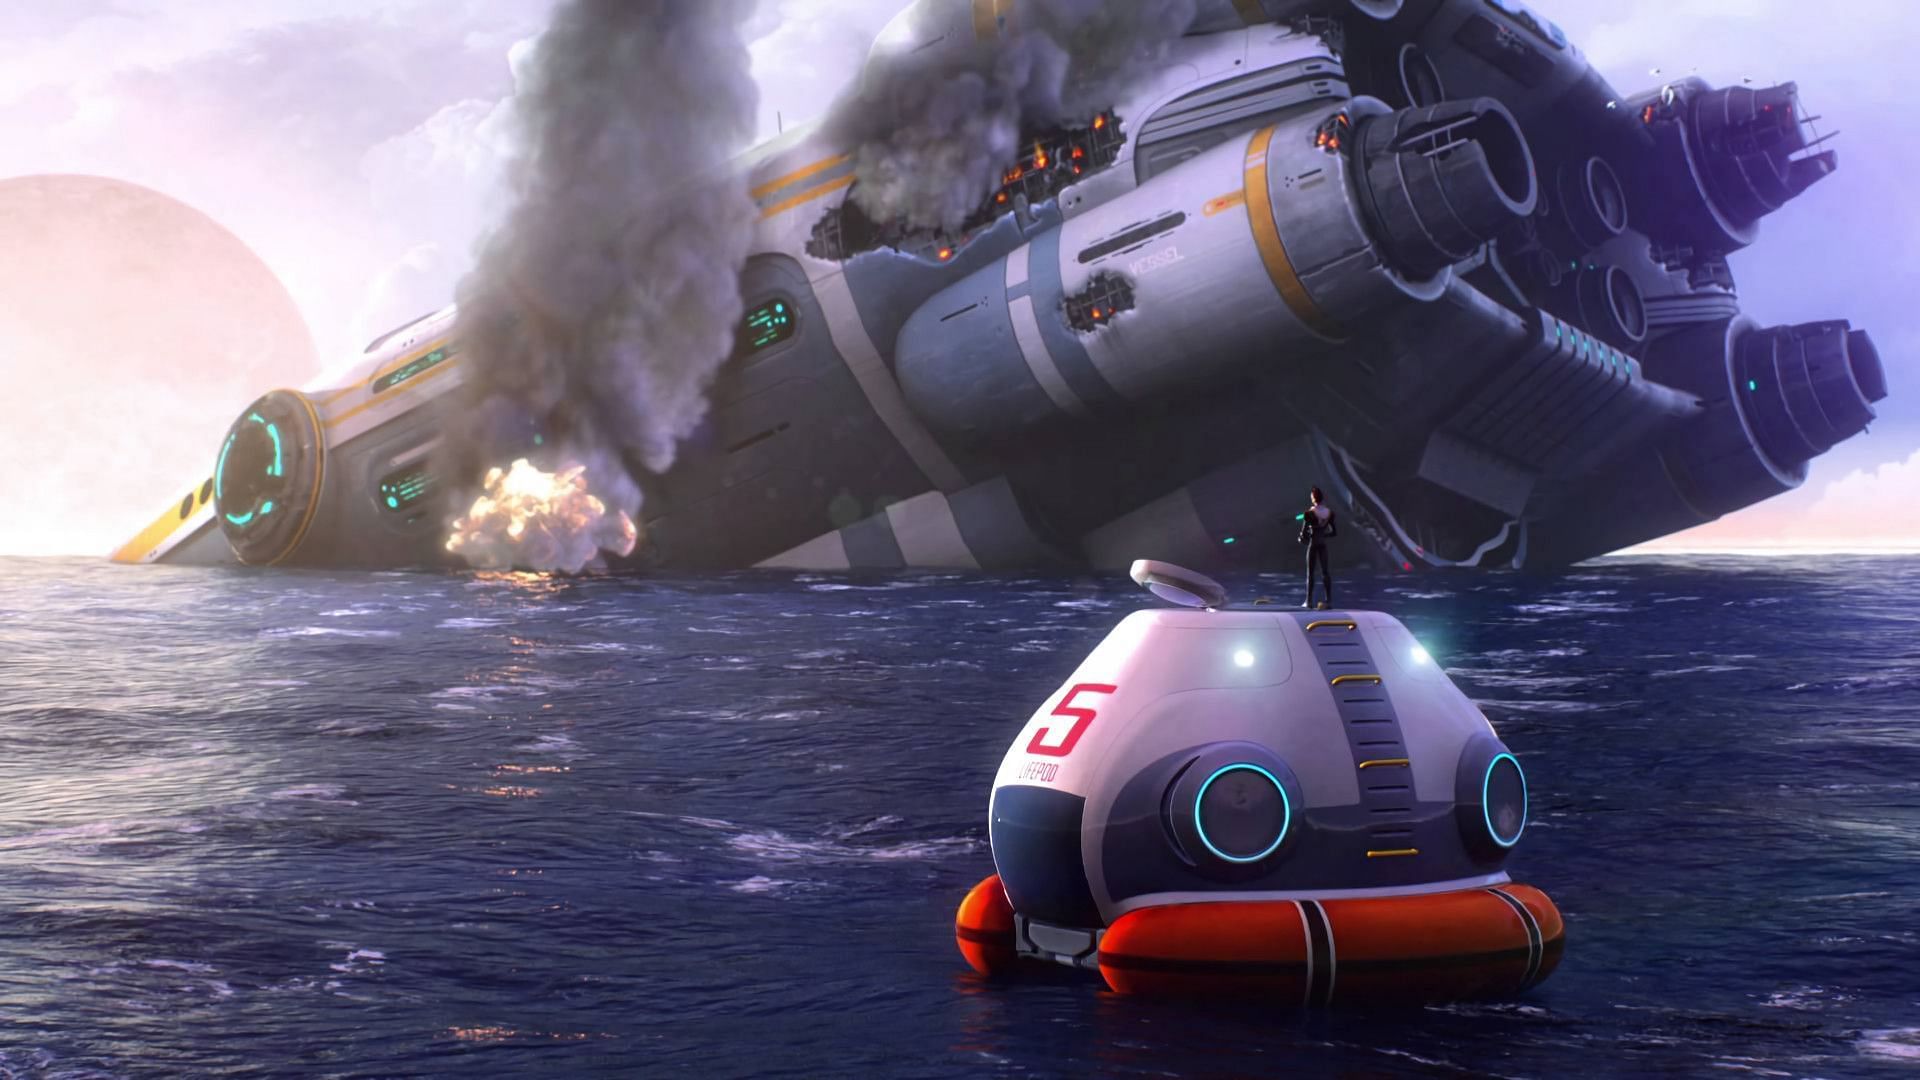 Official artwork for Subnautica (Image via Gearbox Software)